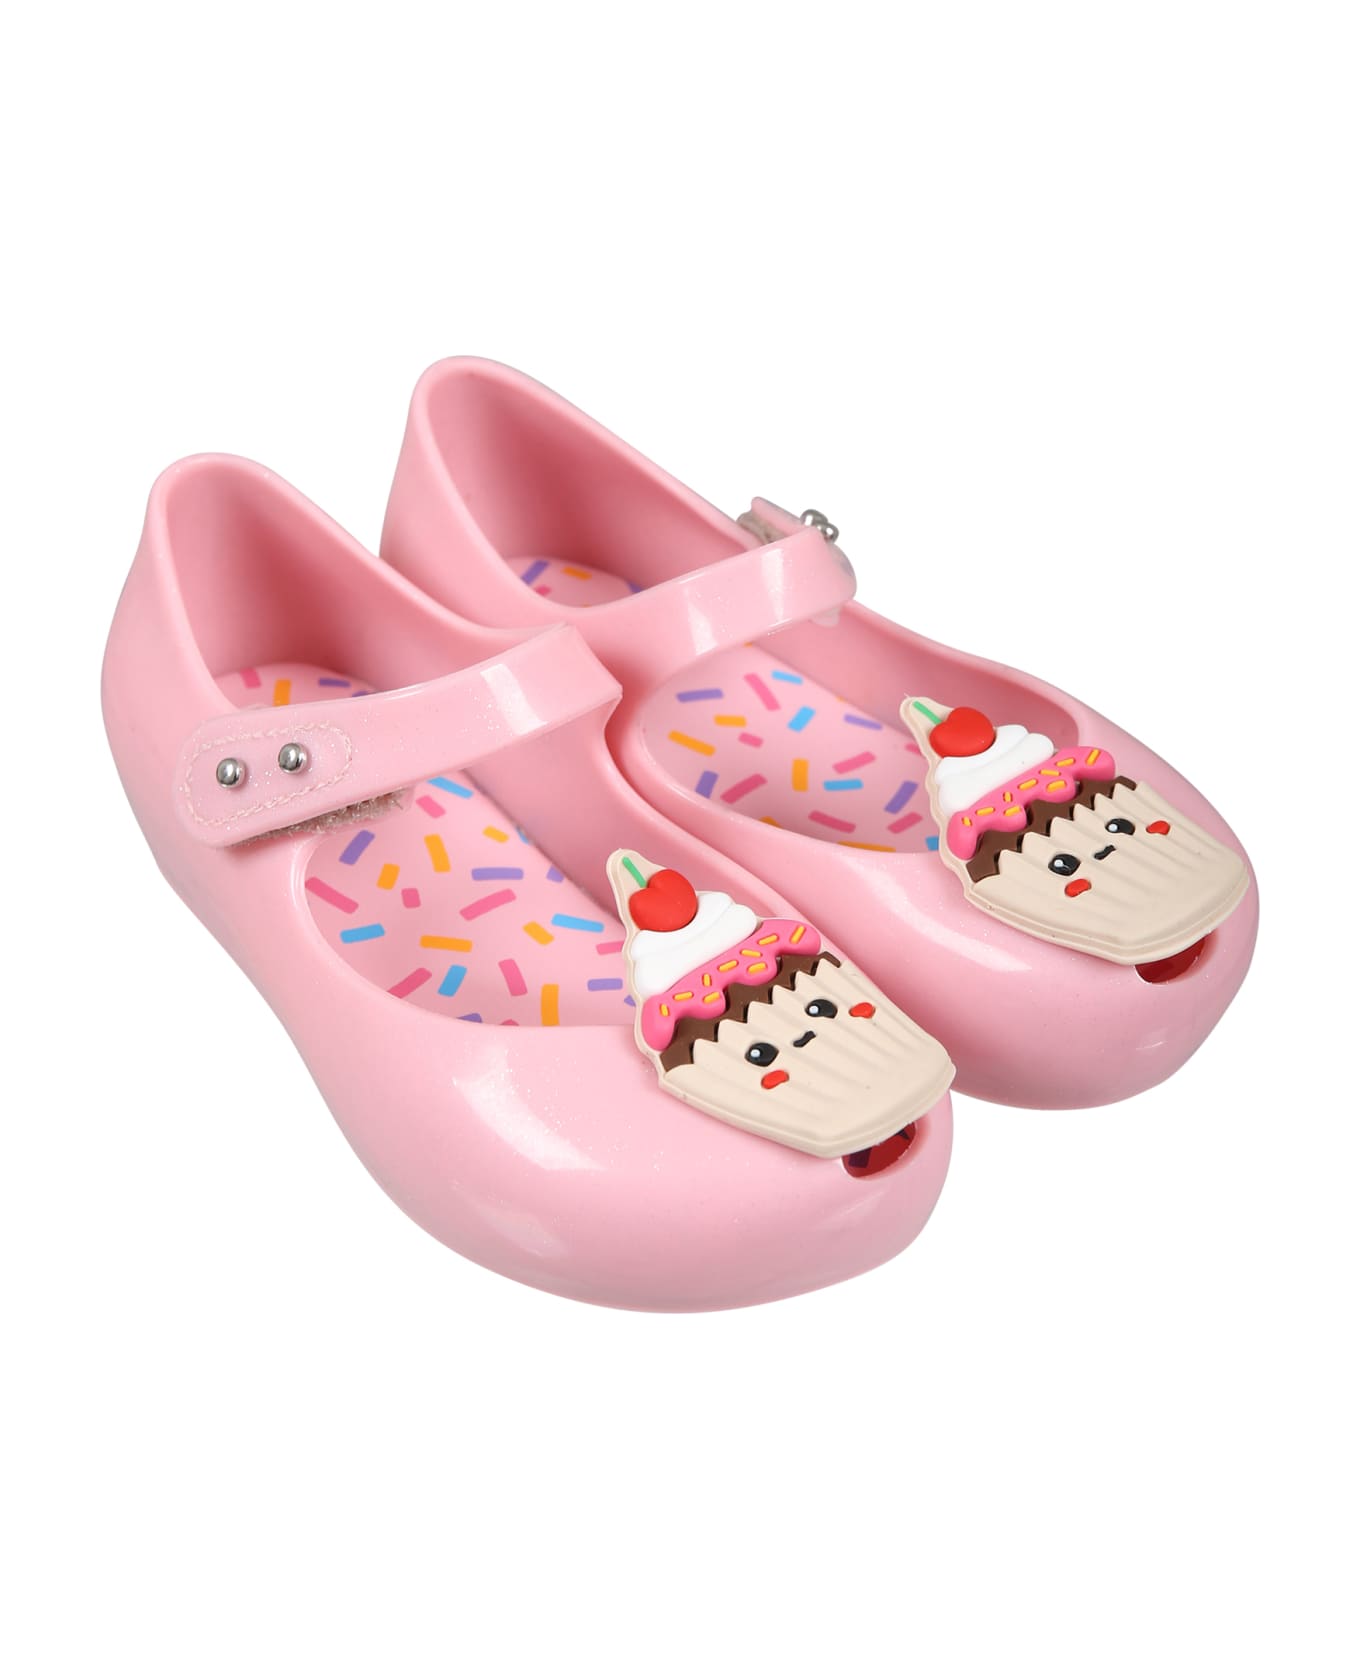 Melissa Pink Ballet Flats For Girl With Cupcake - Pink シューズ